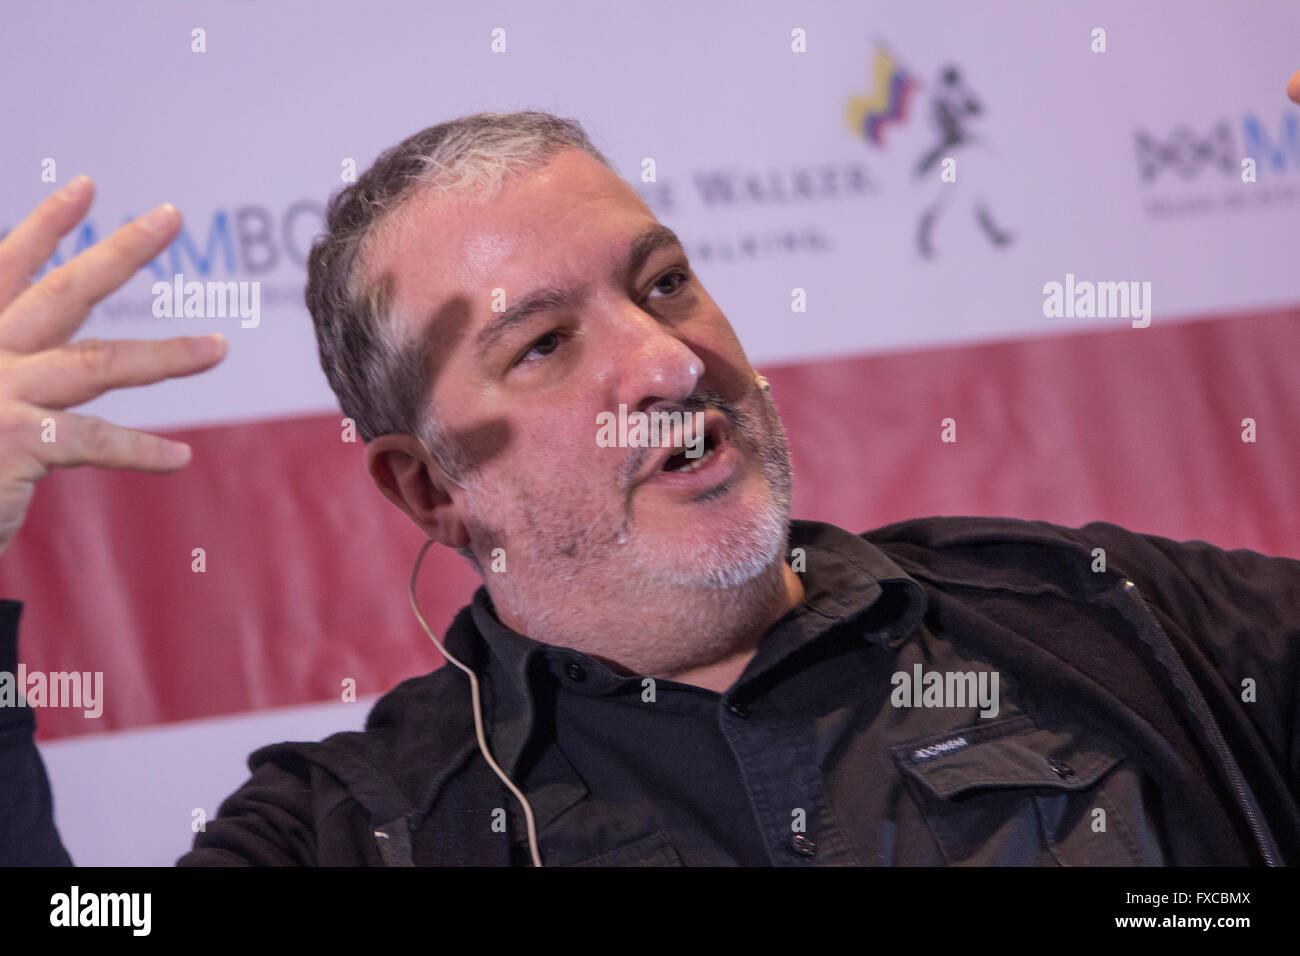 Bogota, Colombia. 14th Apr, 2016. Photographer Spencer Tunick presents in the city of Bogota the '#Mequitolaropapor', with the hopes in involving people to reflect the diversity that exists in Colombia. © Daniel Garzón Herazo/Pacific Press/Alamy Live News Stock Photo